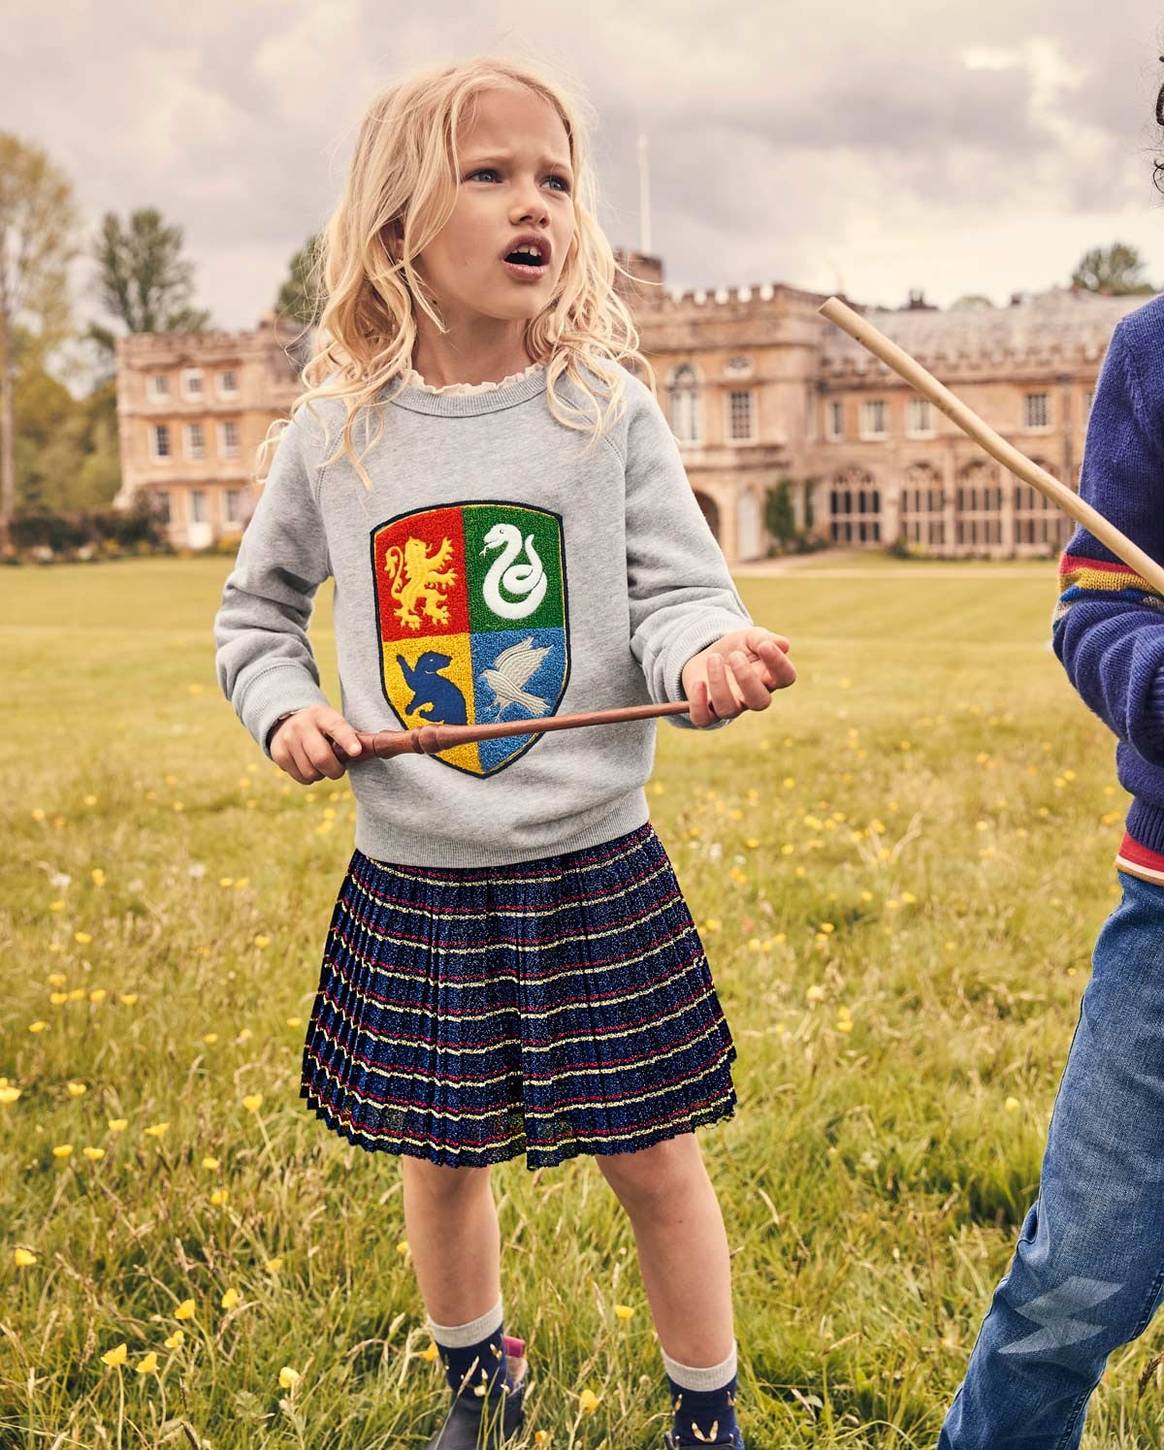 In Pictures: Mini Boden x Harry Potter